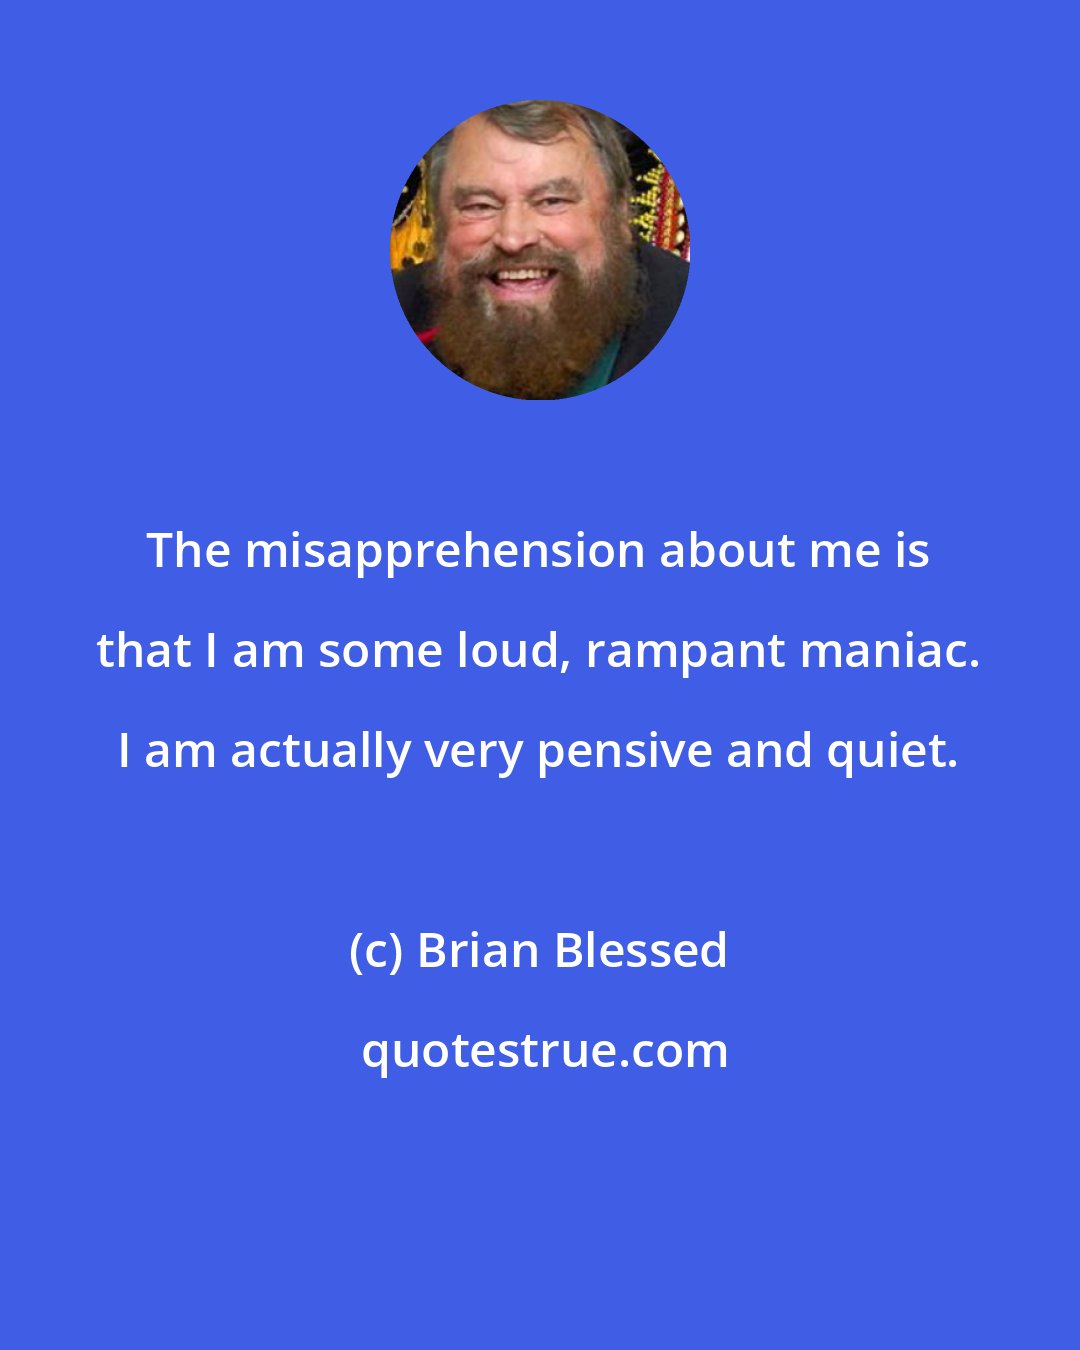 Brian Blessed: The misapprehension about me is that I am some loud, rampant maniac. I am actually very pensive and quiet.